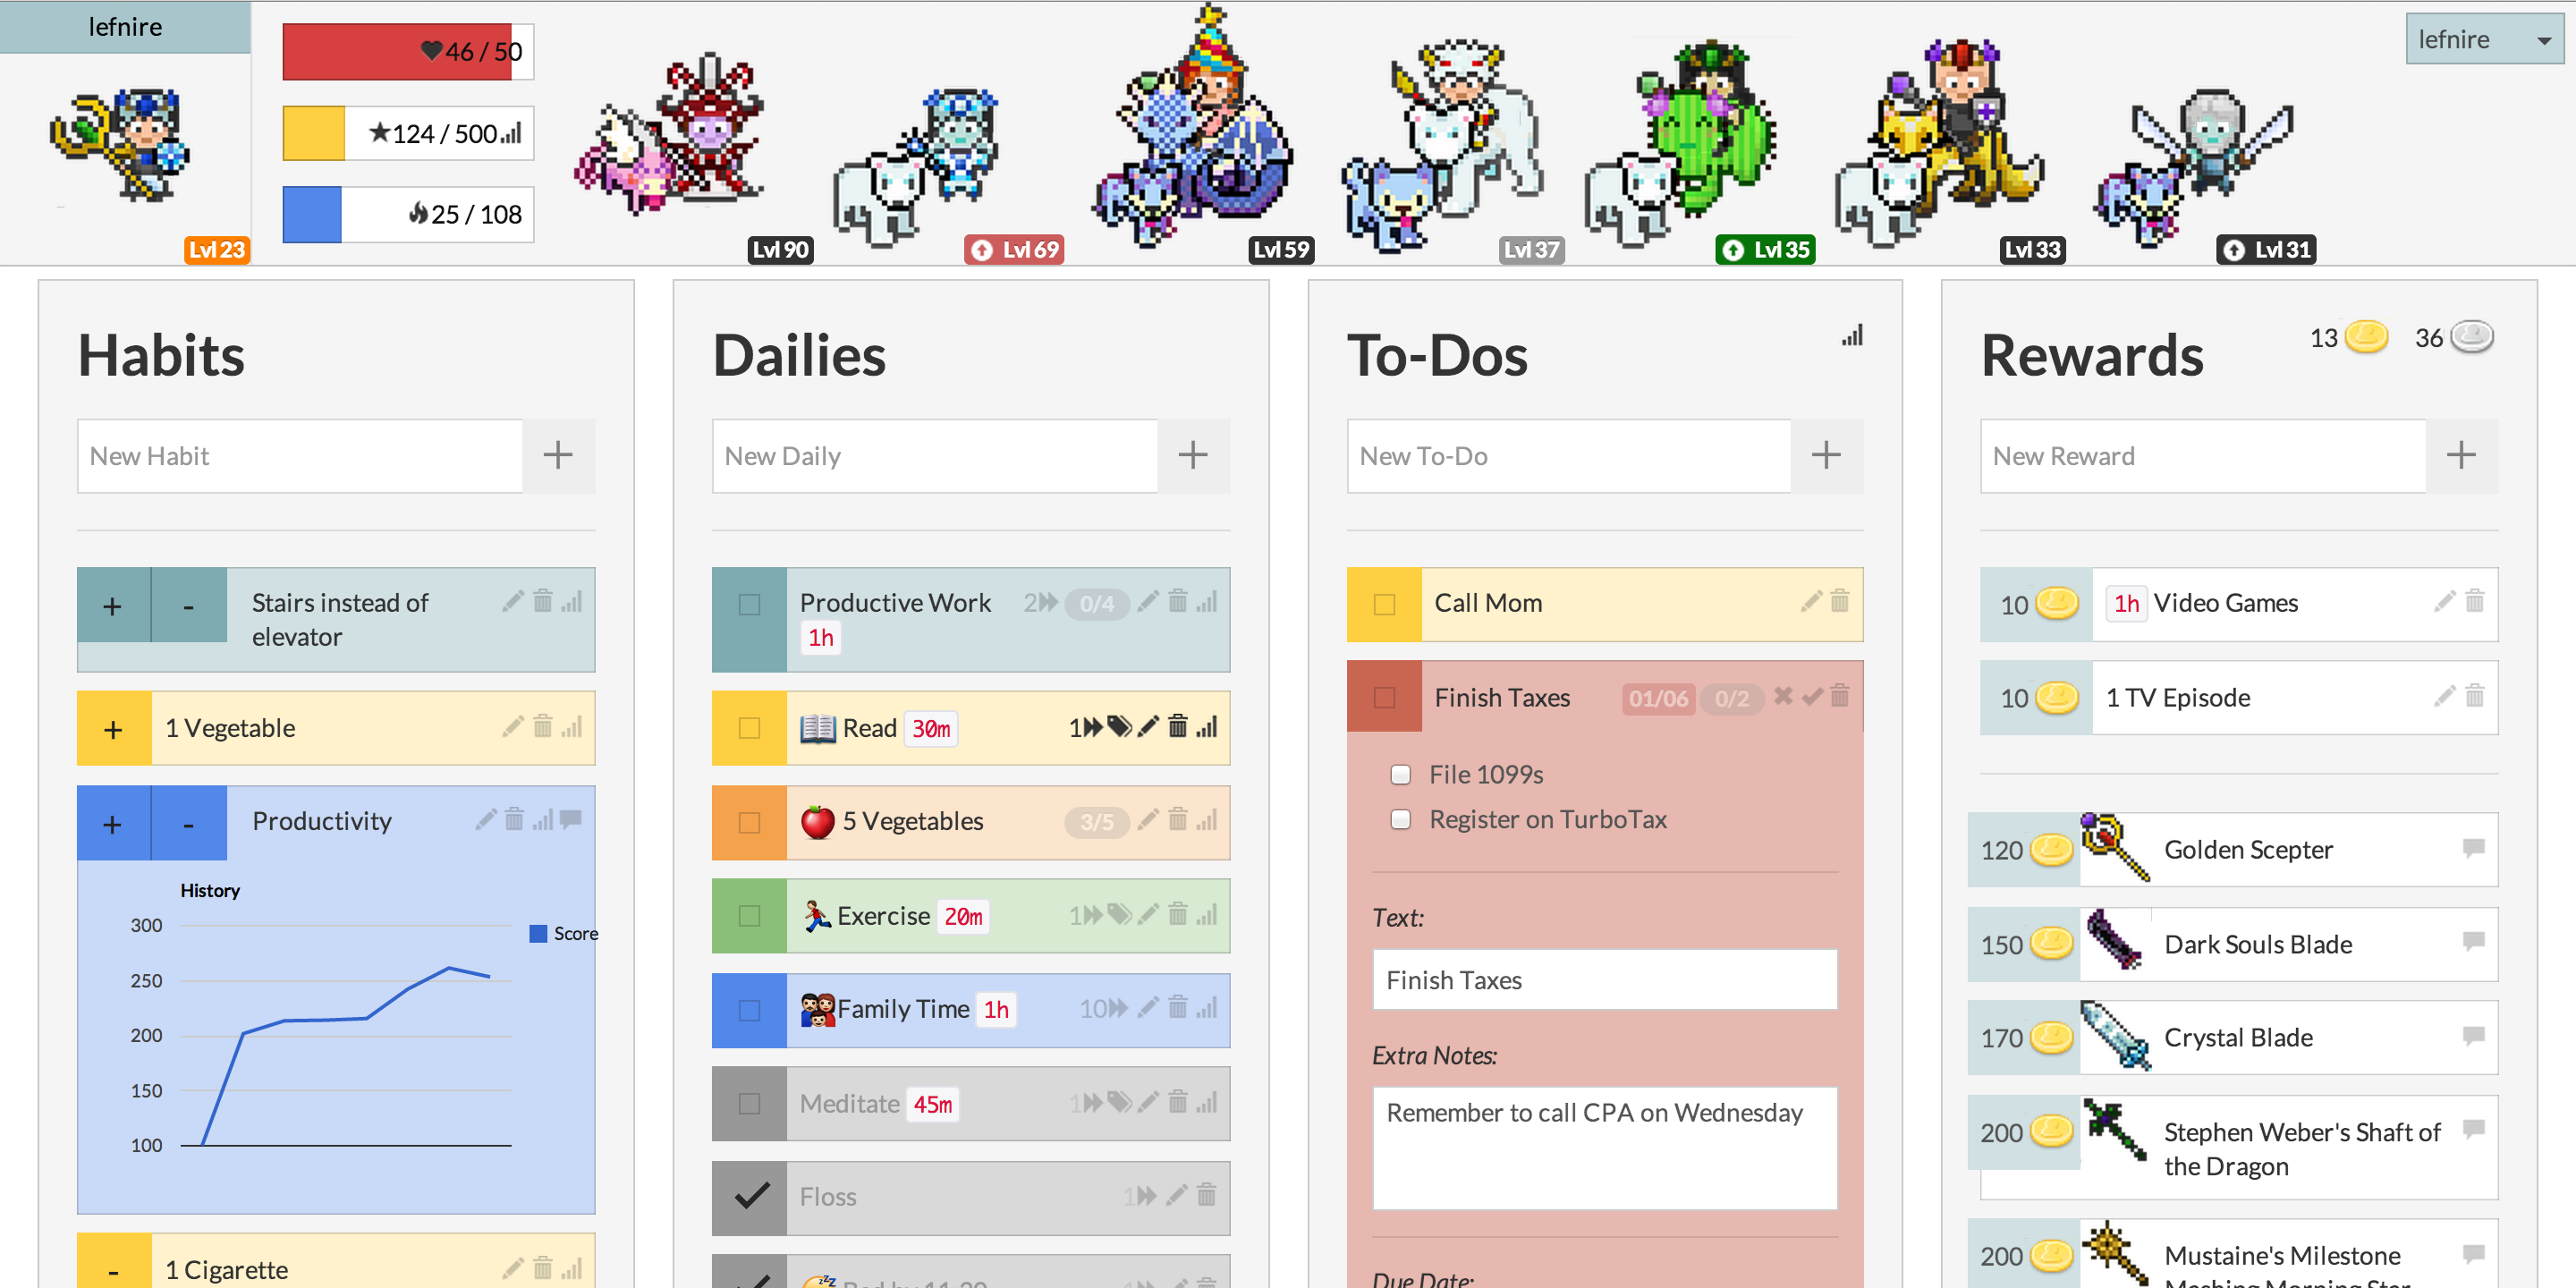 Four screens for the game Habitica including habits, dailies, to-dos, and rewards